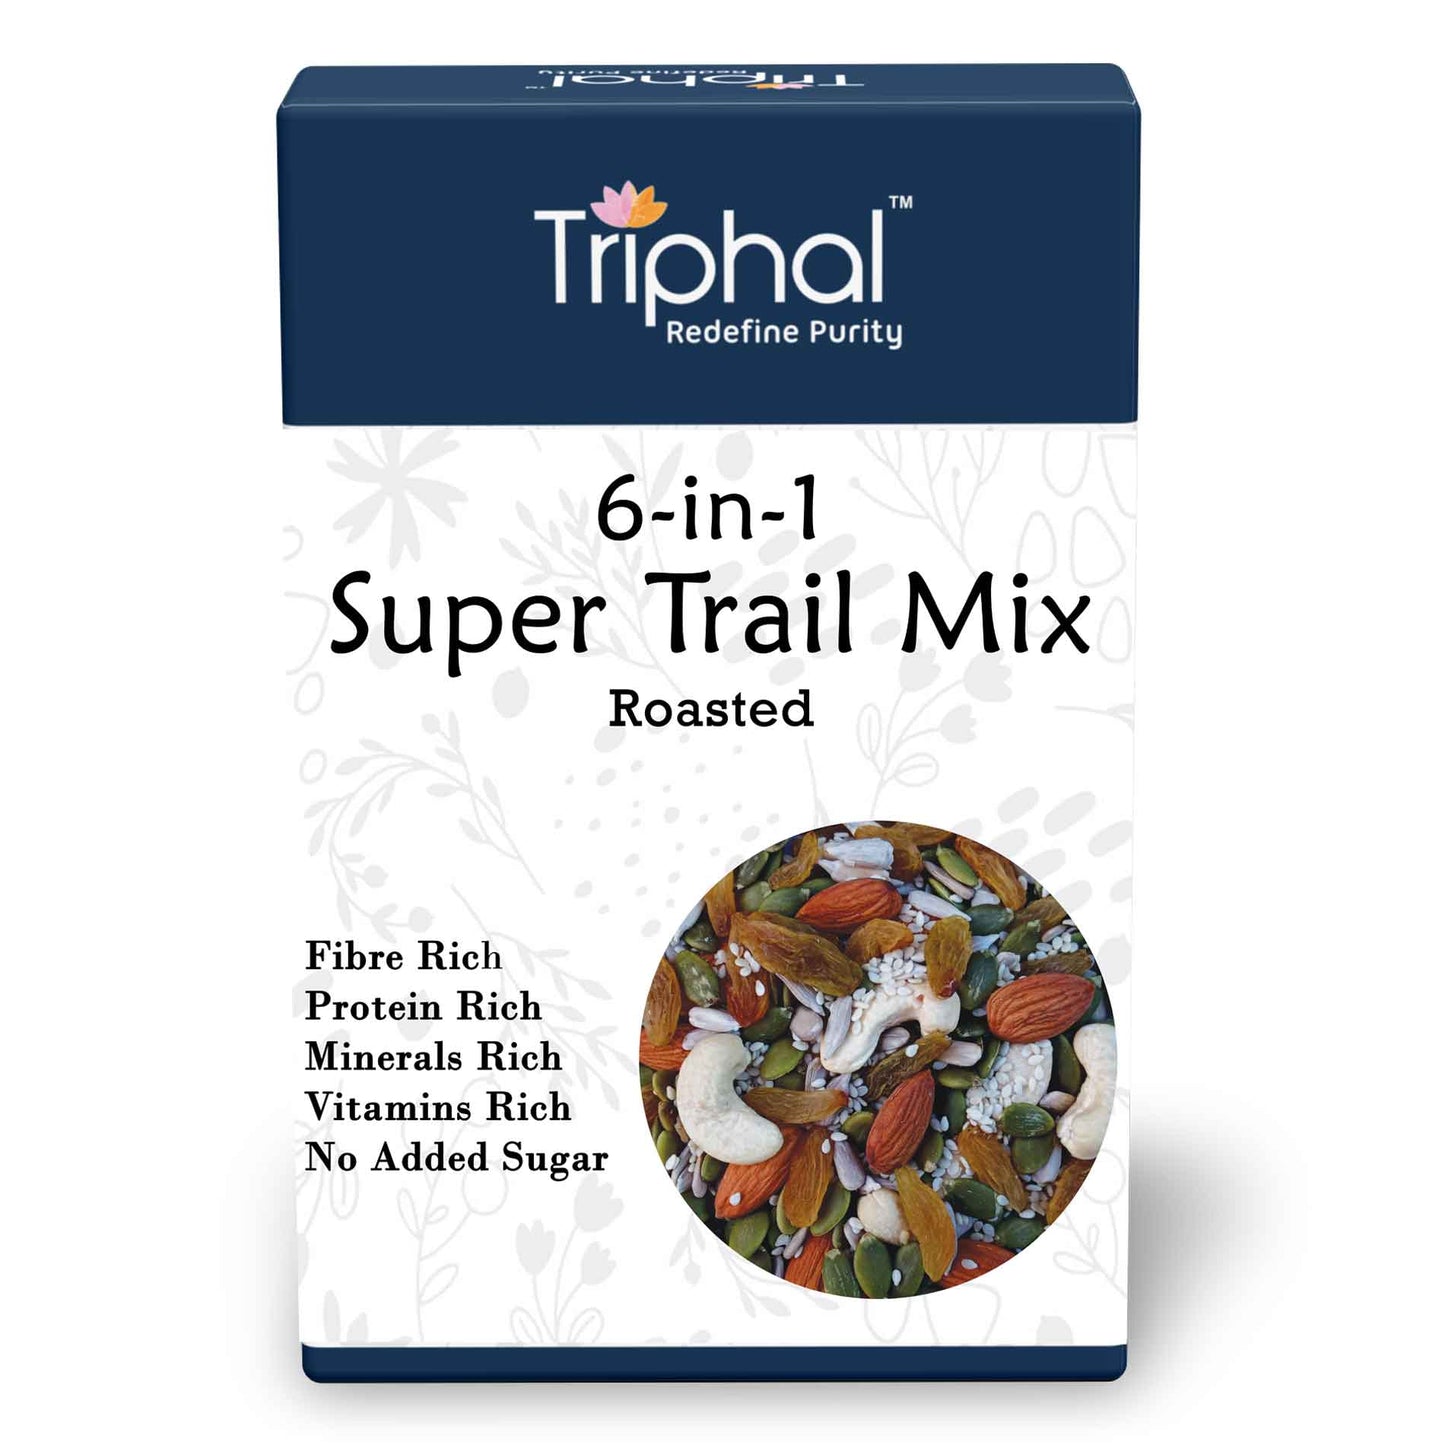 6 in 1 Super Trail Mix by Triphal - A specially curated mixtures of edible super seeds for daily essential nutrients